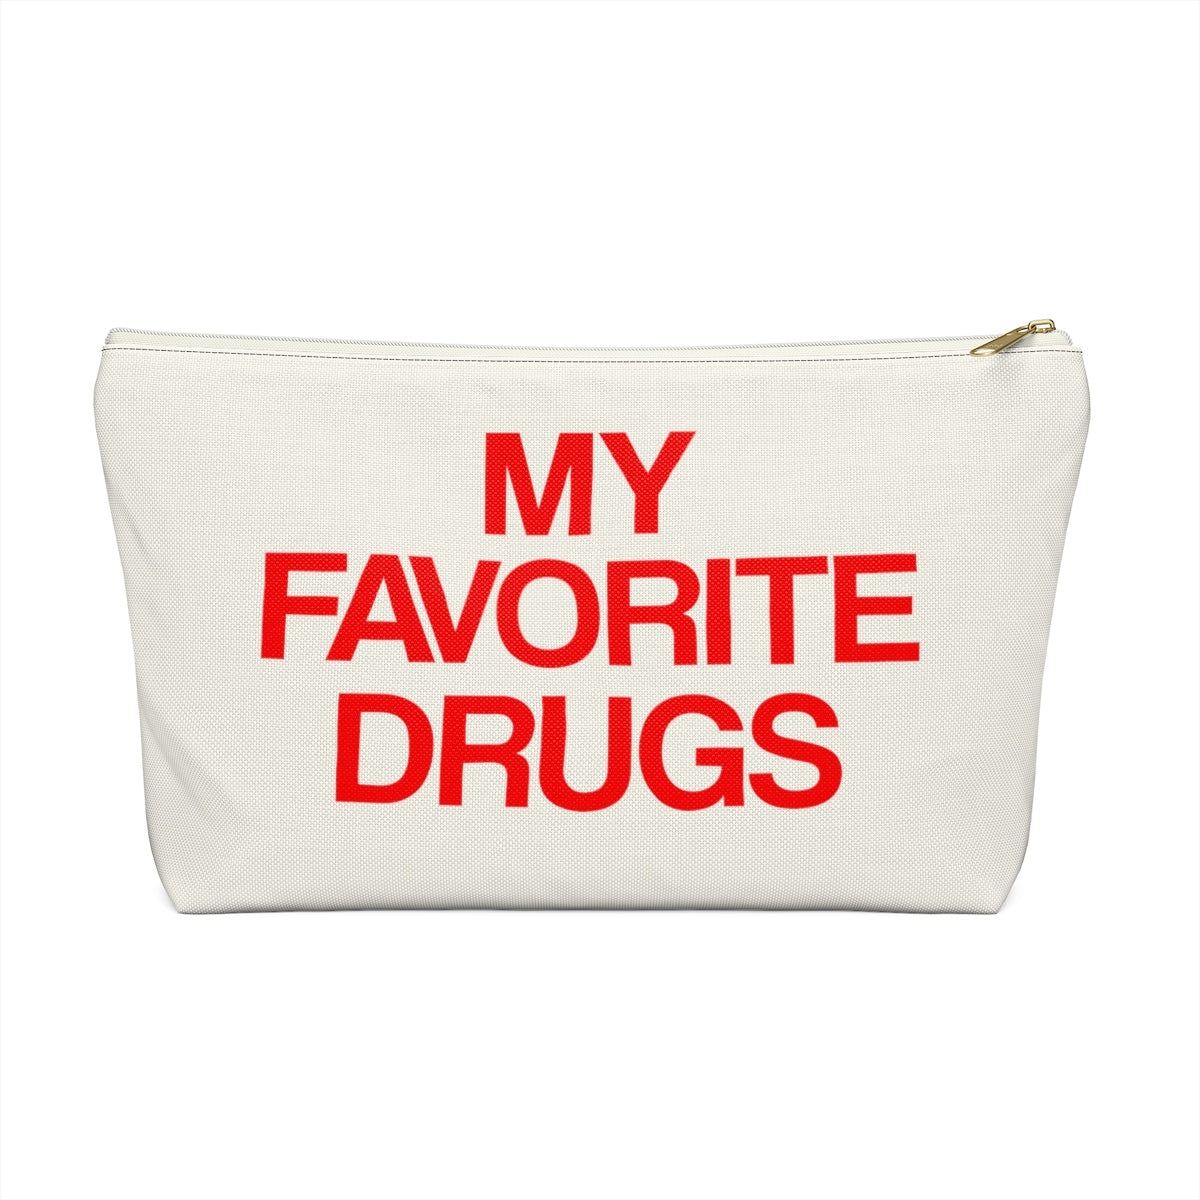 My Favorite Drugs Bag Pouch, Funny Fun Medicinal Medical Medicine Medication Bag Pills Makeup Festival Accessory Pouch w T-bottom Starcove Fashion